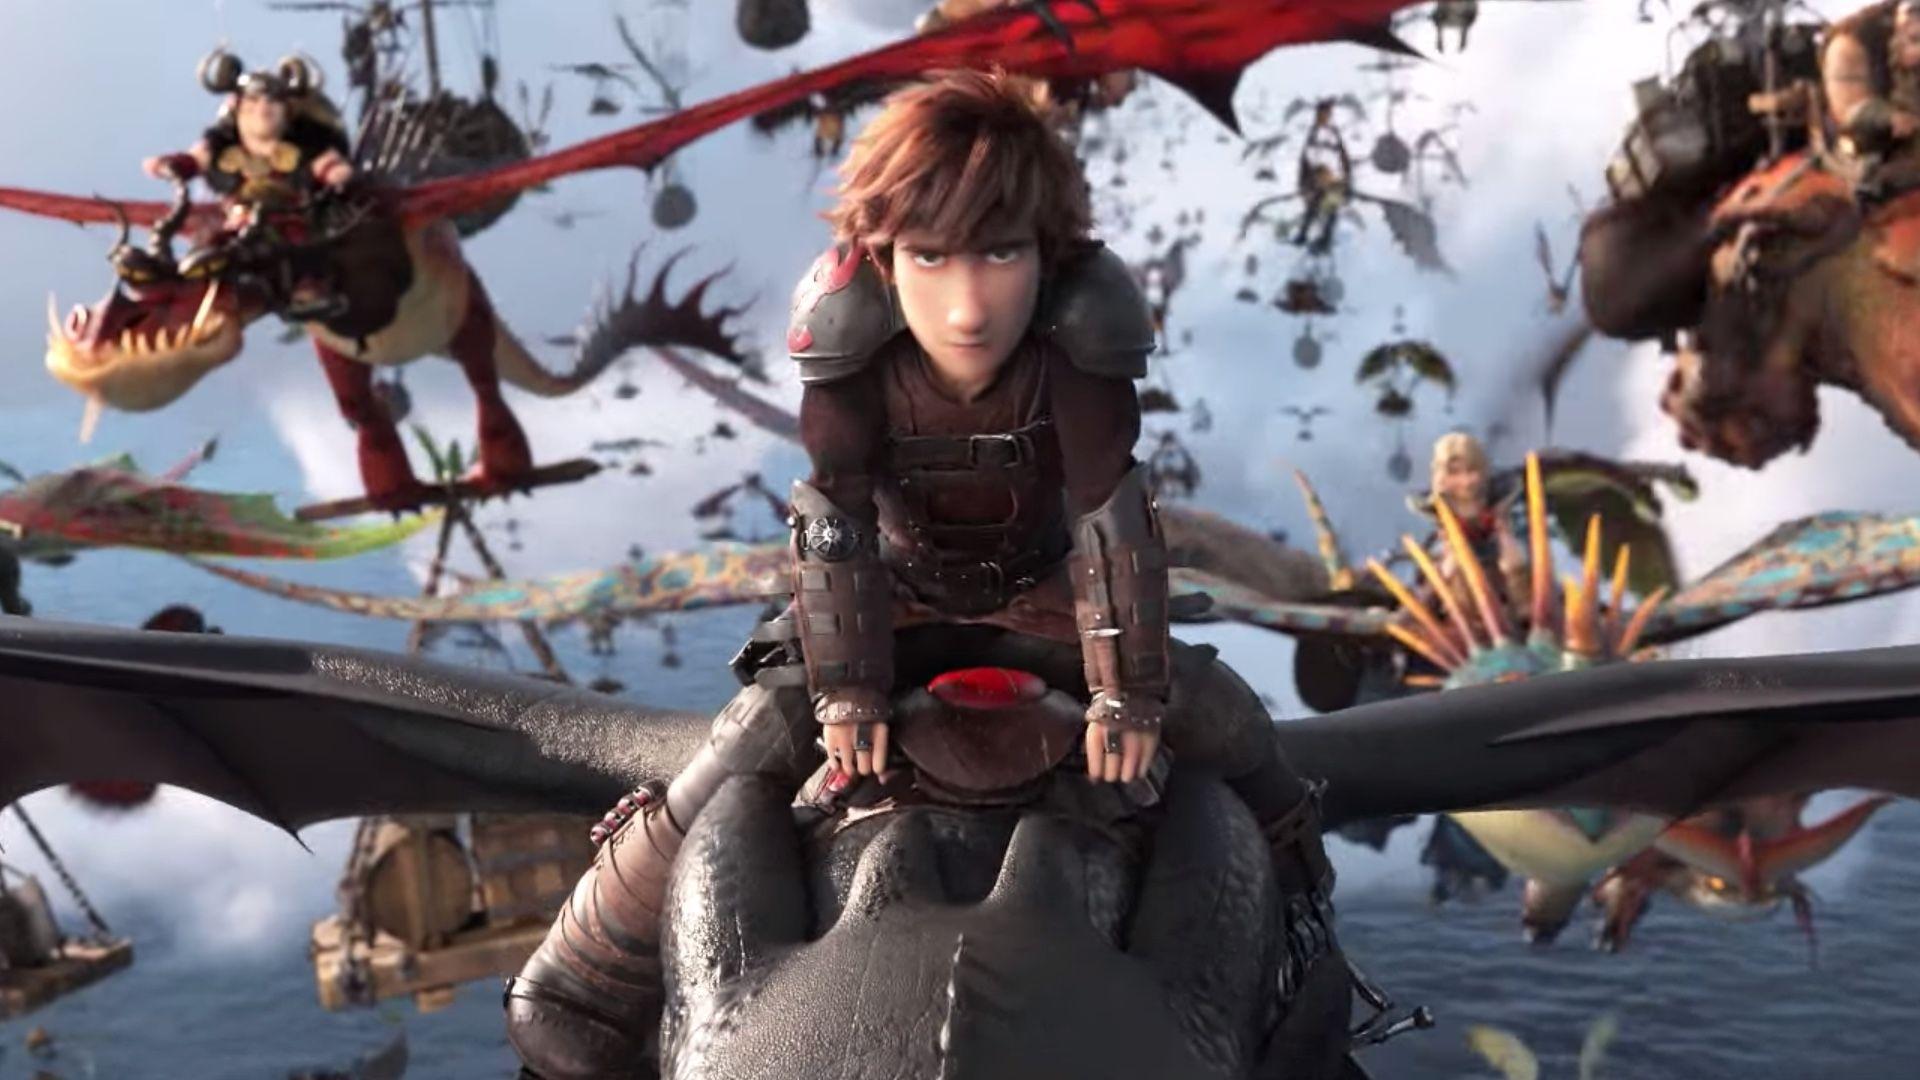 HOW TO TRAIN YOUR DRAGON: THE HIDDEN WORLD Gets Another Awesome